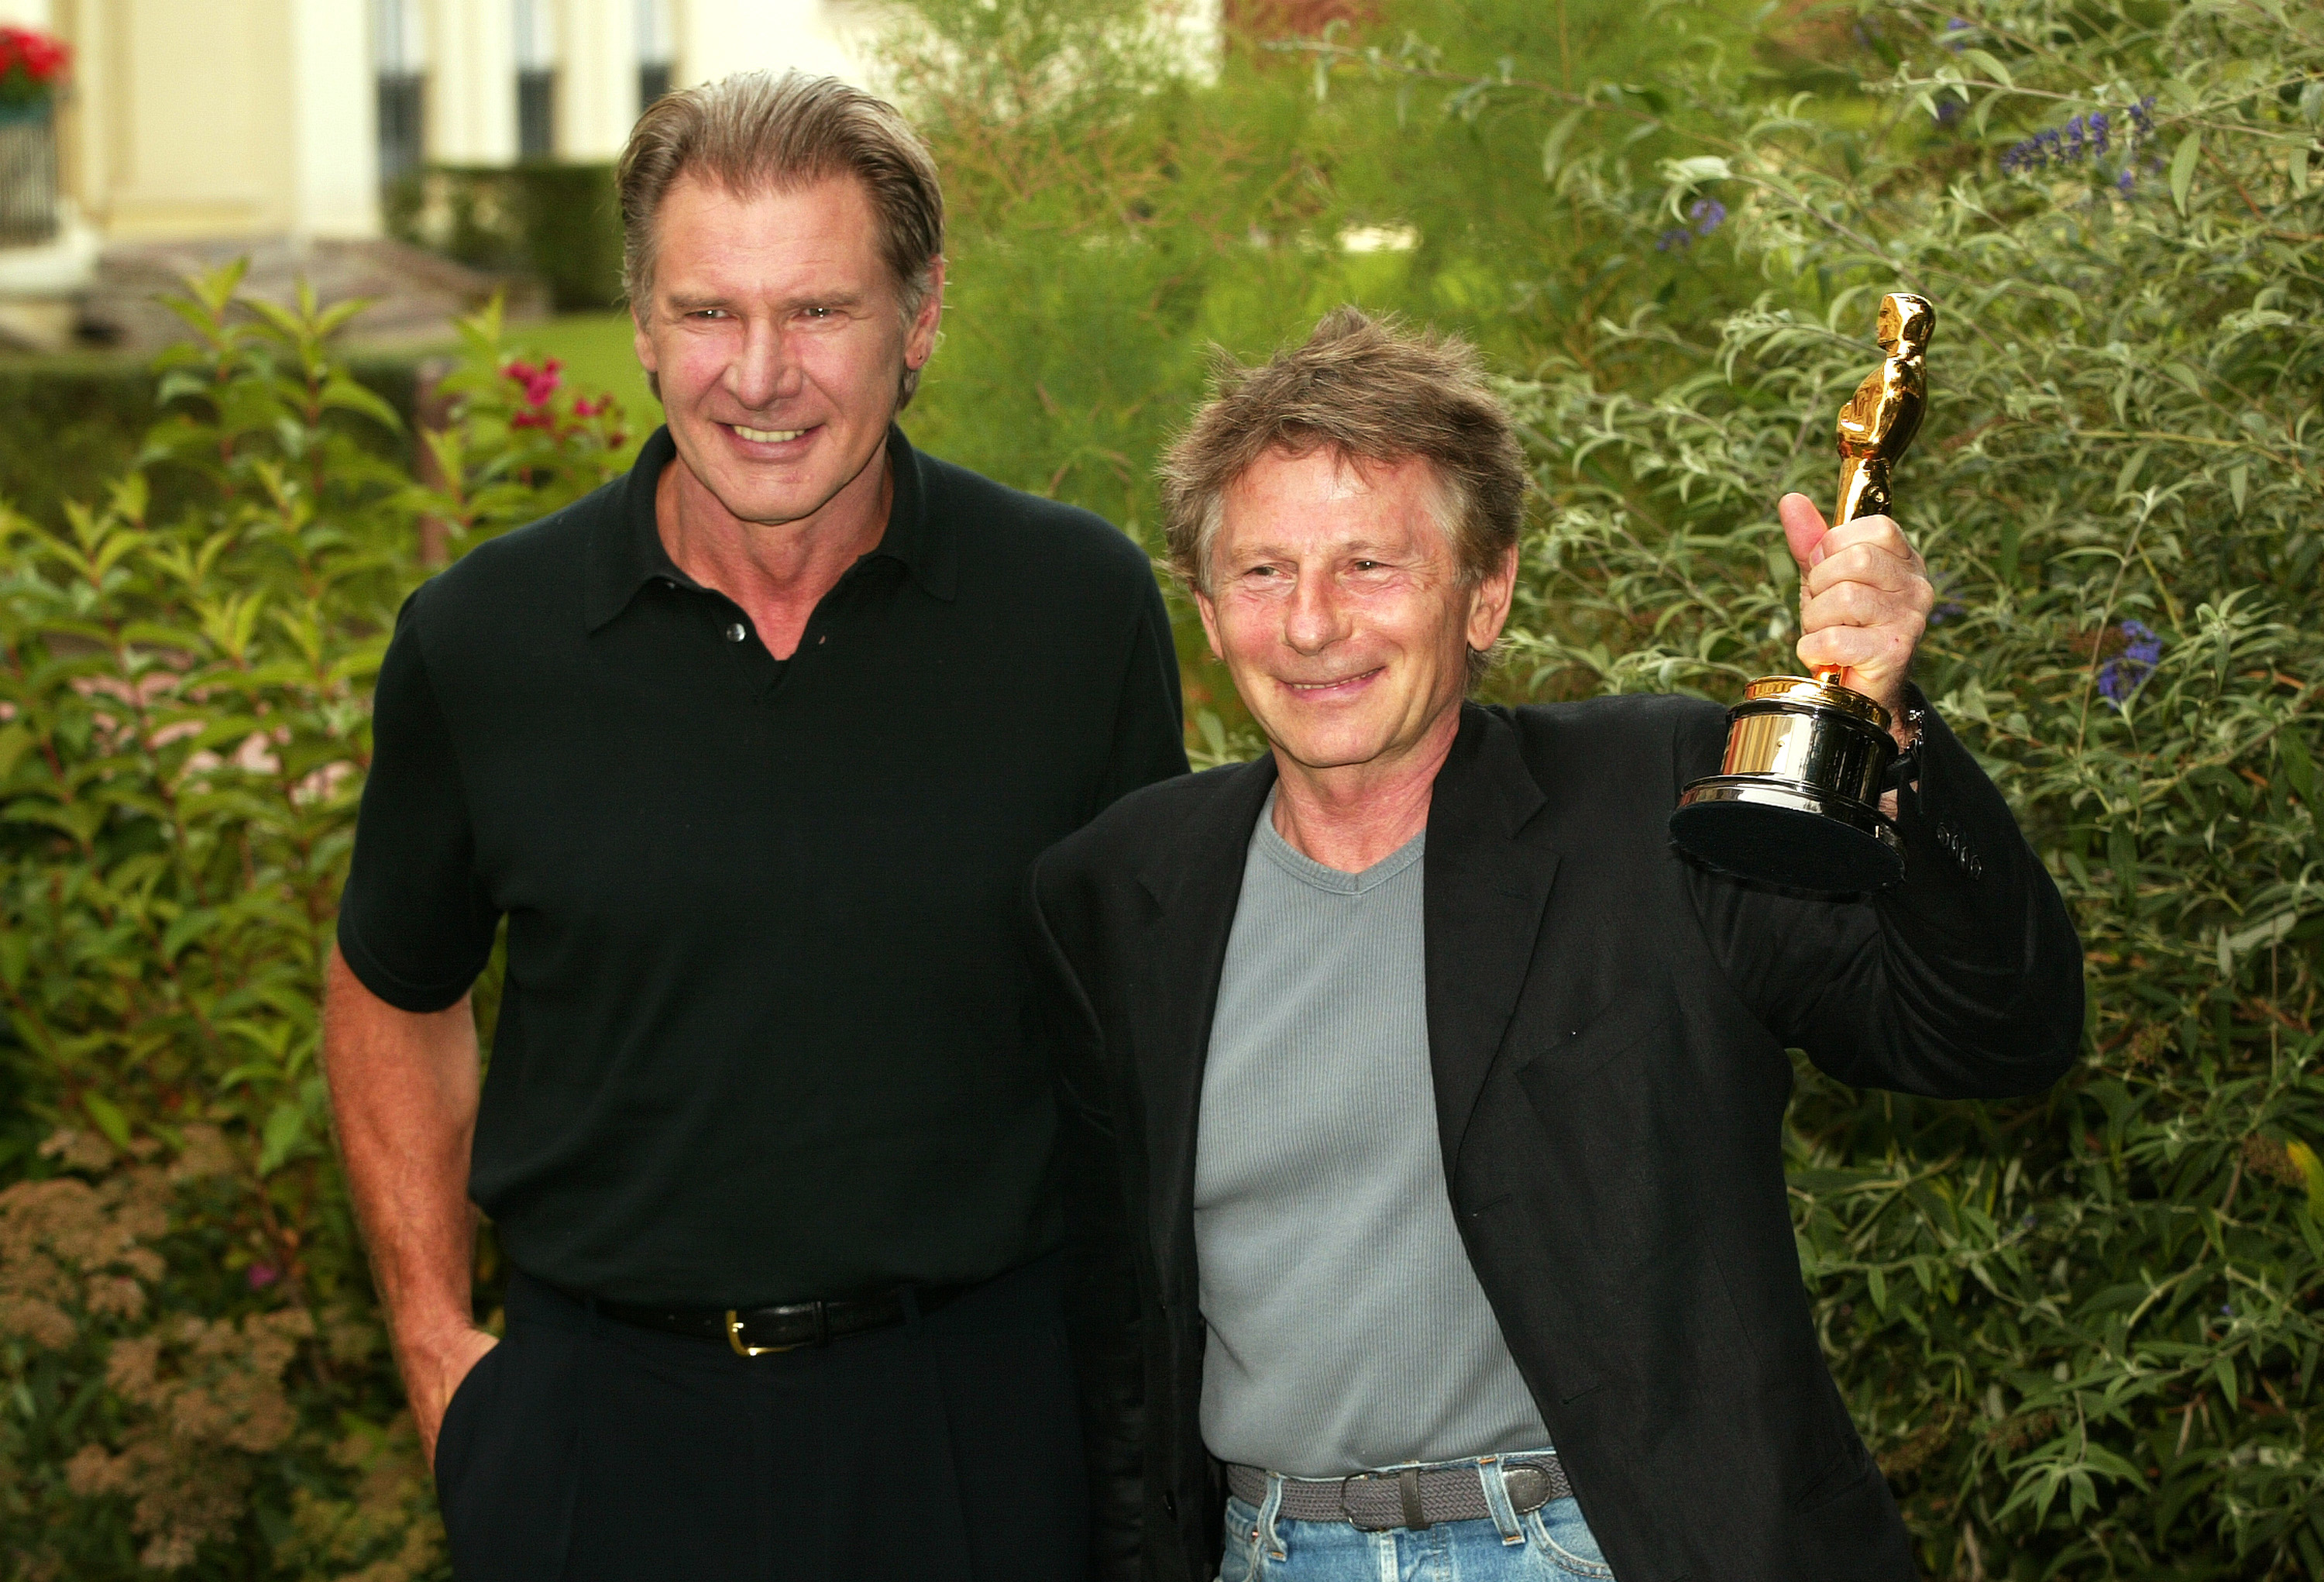 Roman Polanski receives his Oscar from Harrison Ford for the movie "The Pianist" during the 2003 Deauville Film Festival on September 7, 2003 | Source: Getty Images